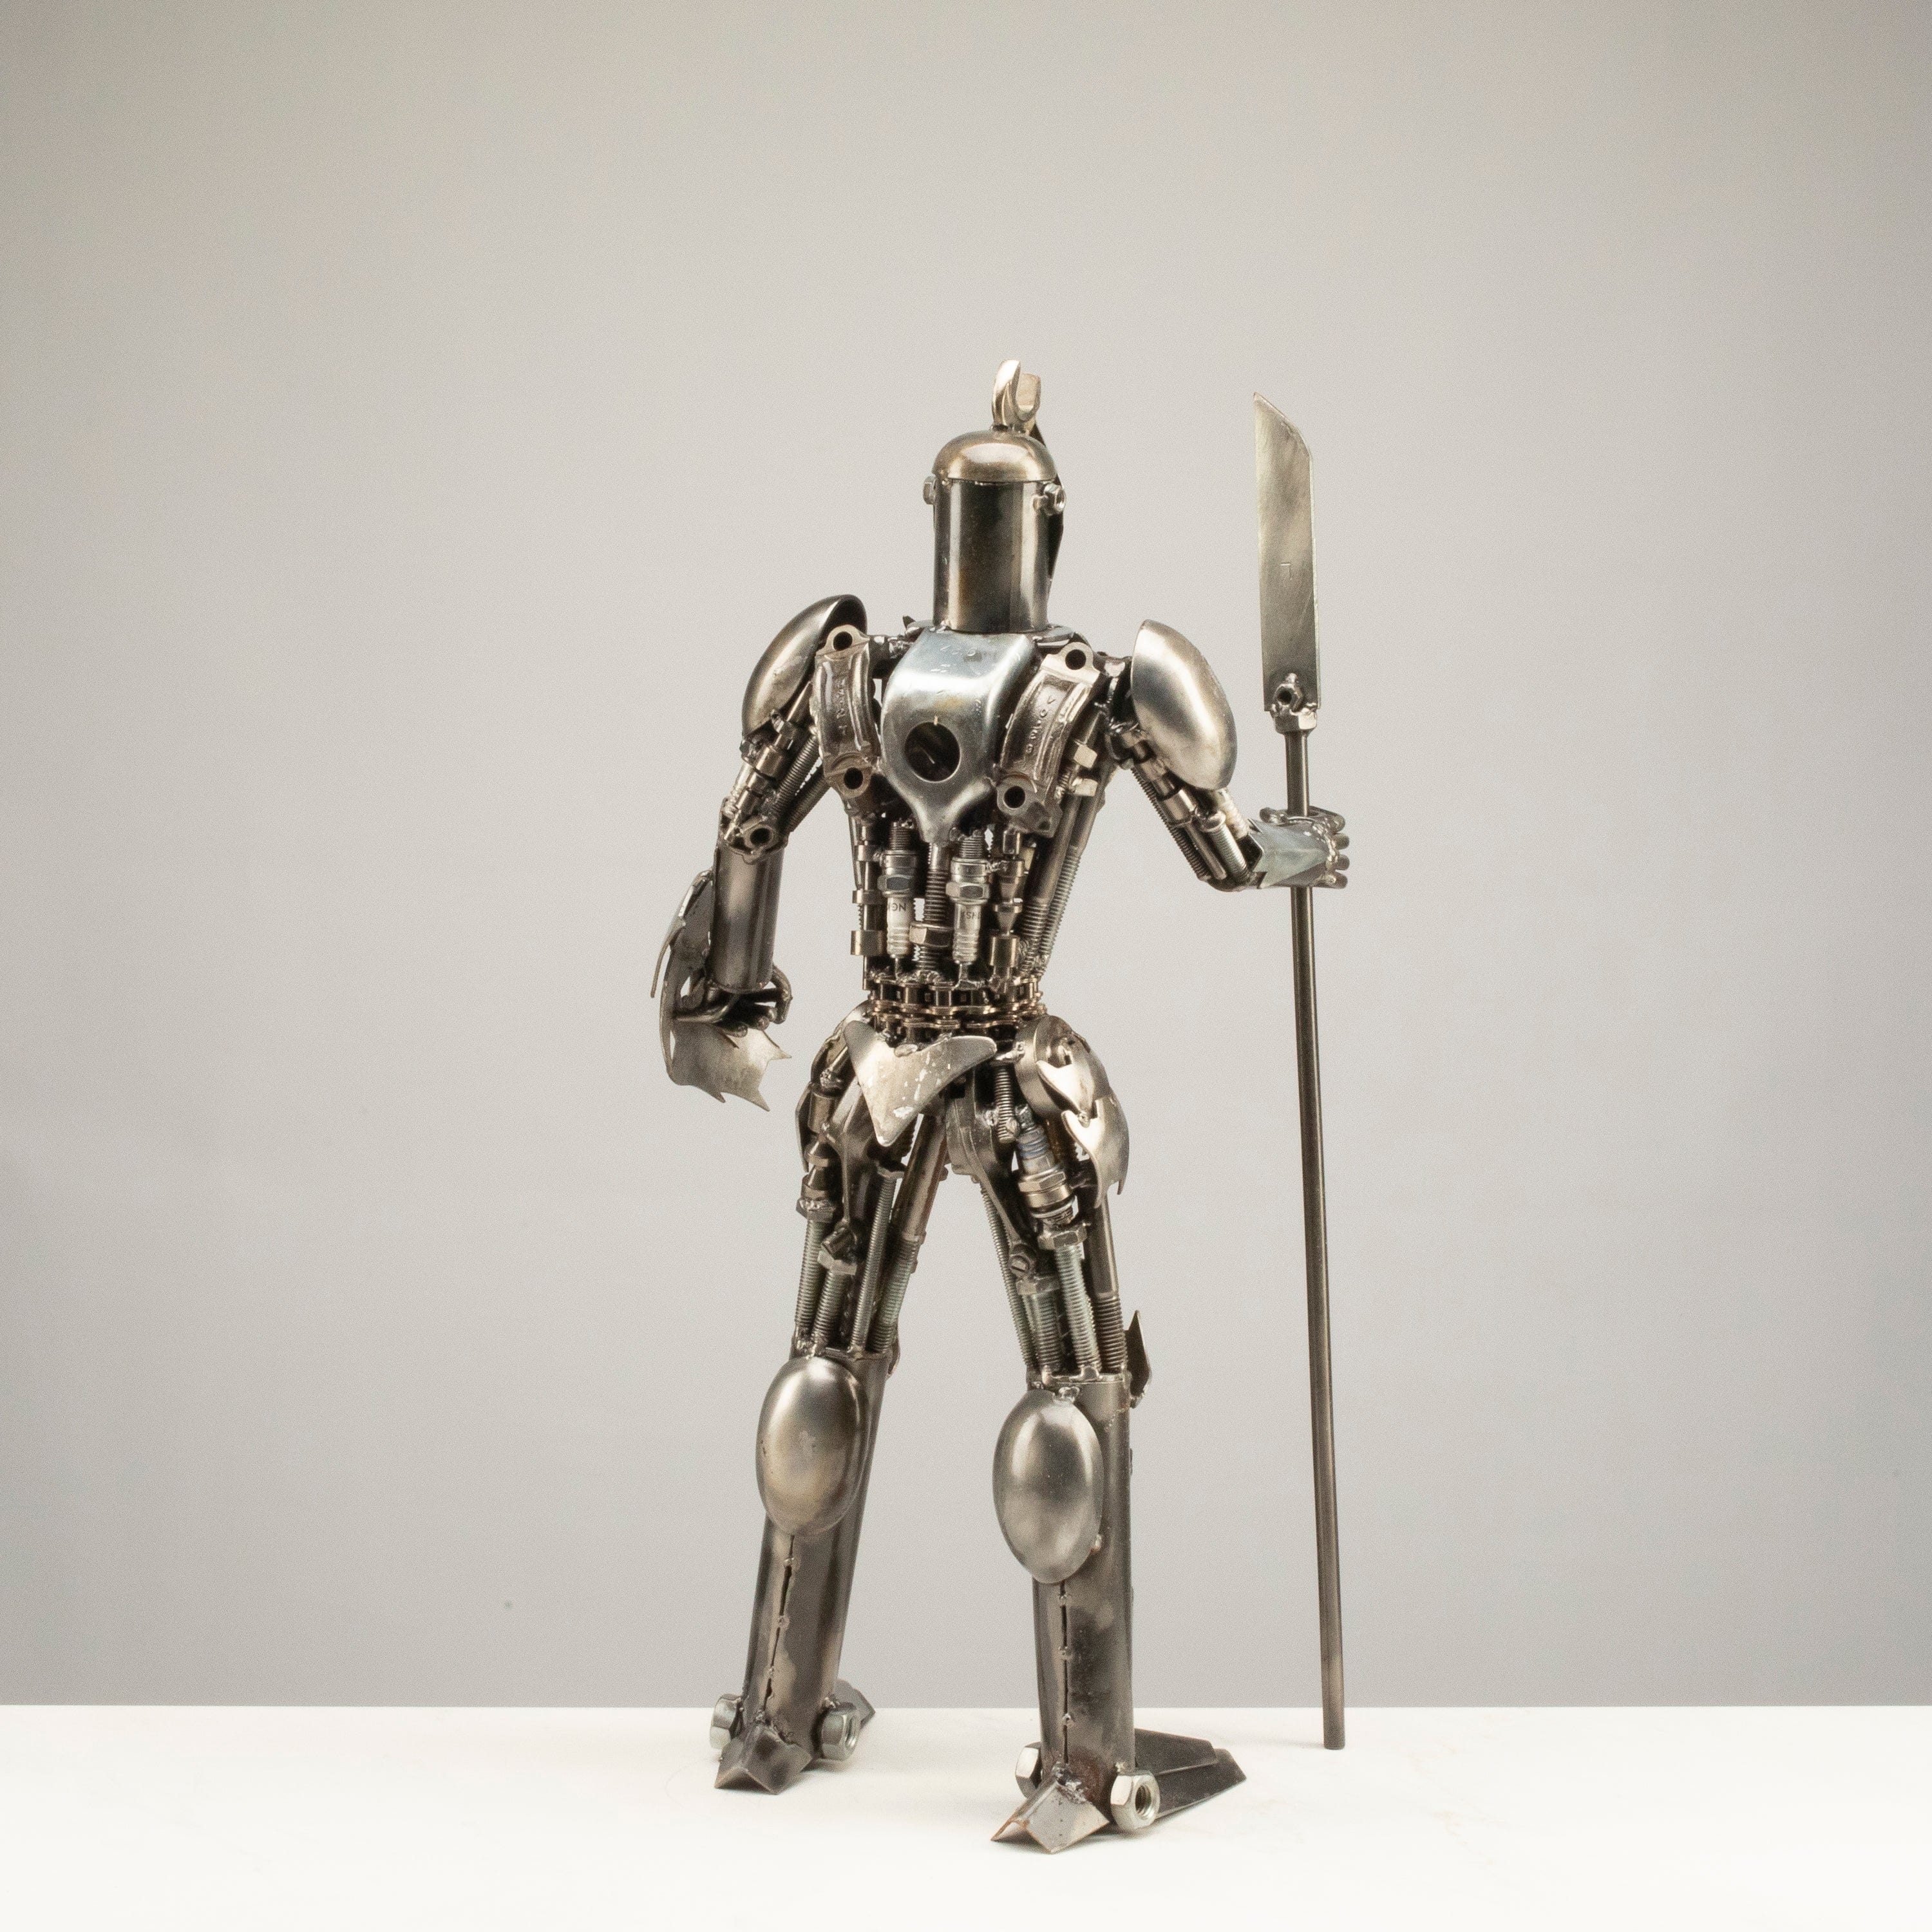 Kalifano Recycled Metal Art 22" Knight Recycled Metal Art Sculpture RMS-KN55-S